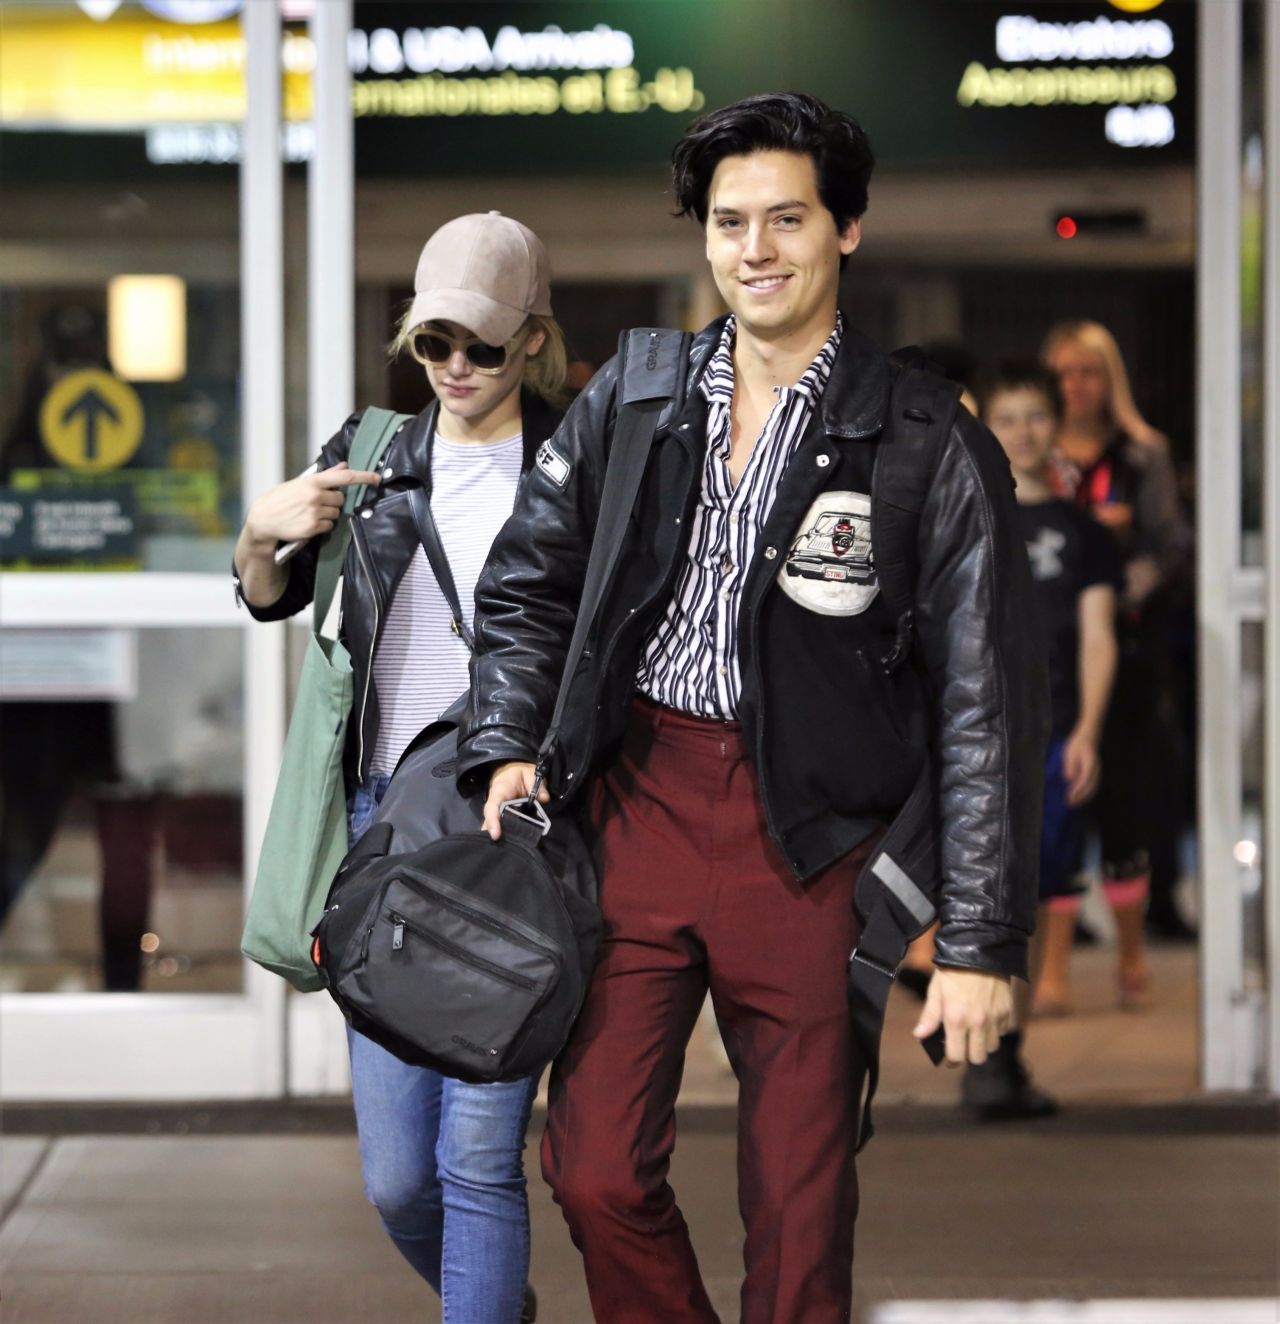 lili-reinhart-and-cole-sprouse-arriving-back-in-vancouver-01-10-2018-4.jpg